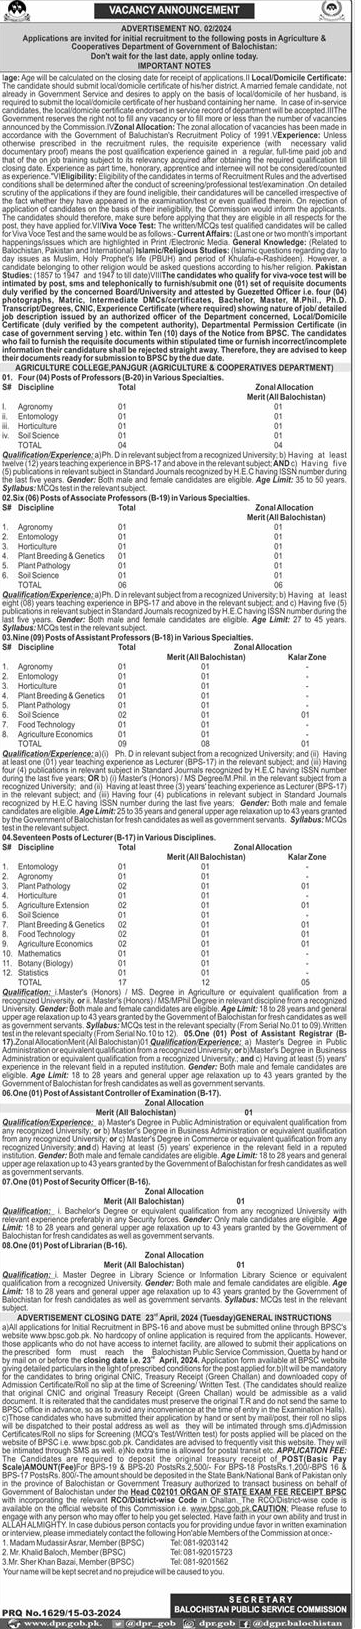 BPS-16 to BPS-20 BPSC Vacancies Ad No. 02 / 2024 